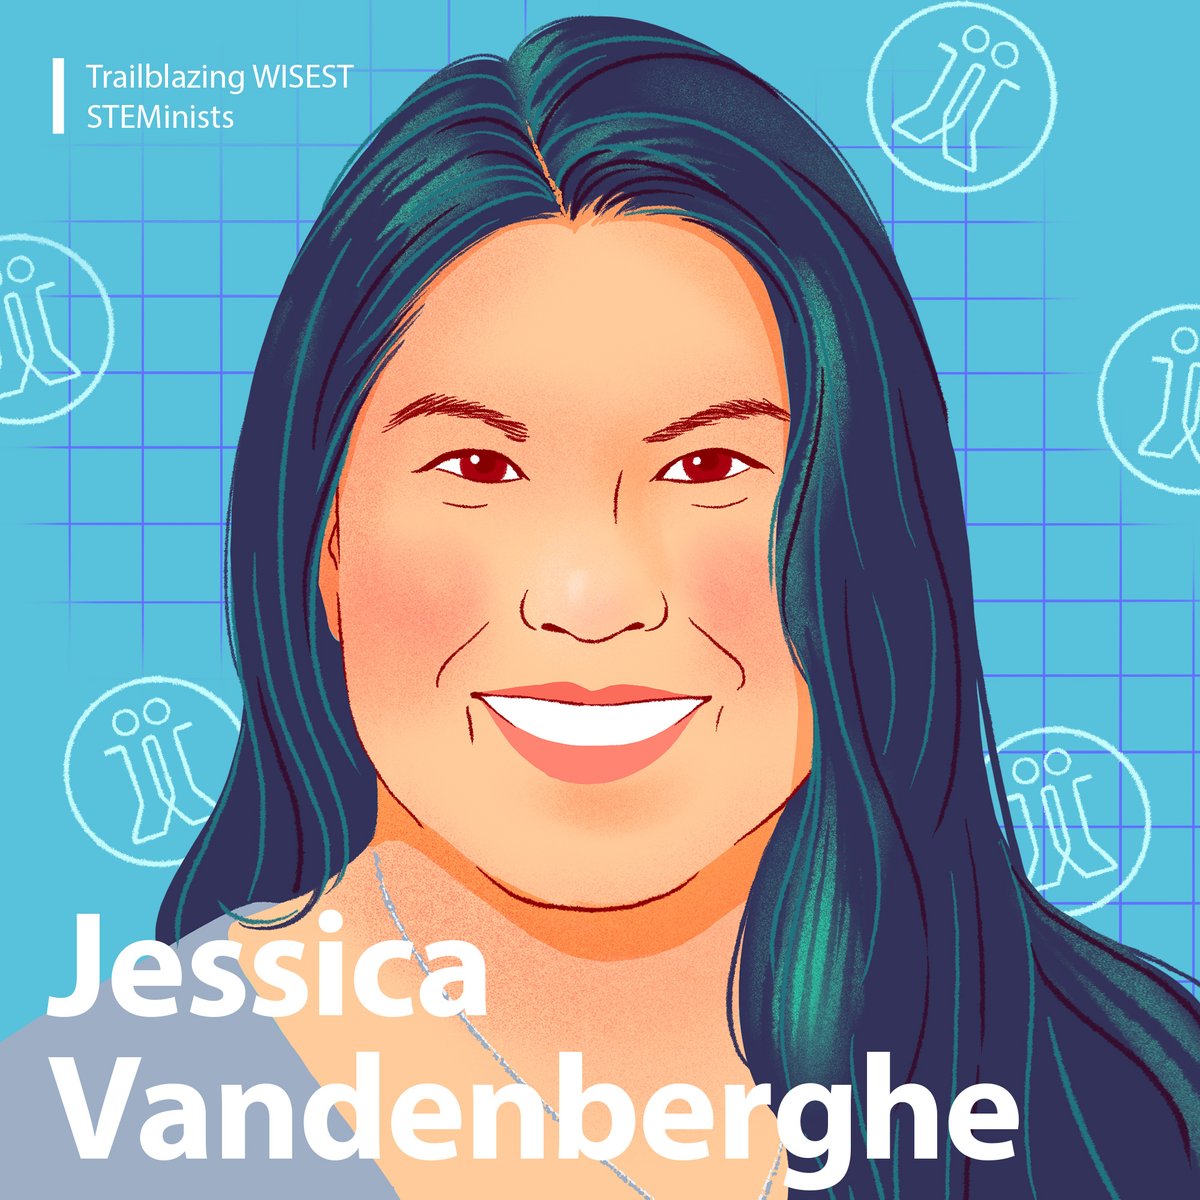 For the next profile of our Trailblazing WISEST STEMinist postcard series, meet Jessica Vandenberghe (@JMVandenberghe)! Read about her story and request your postcards here: ualberta.ca/women-in-schol…

@uvic @AWSNSocial